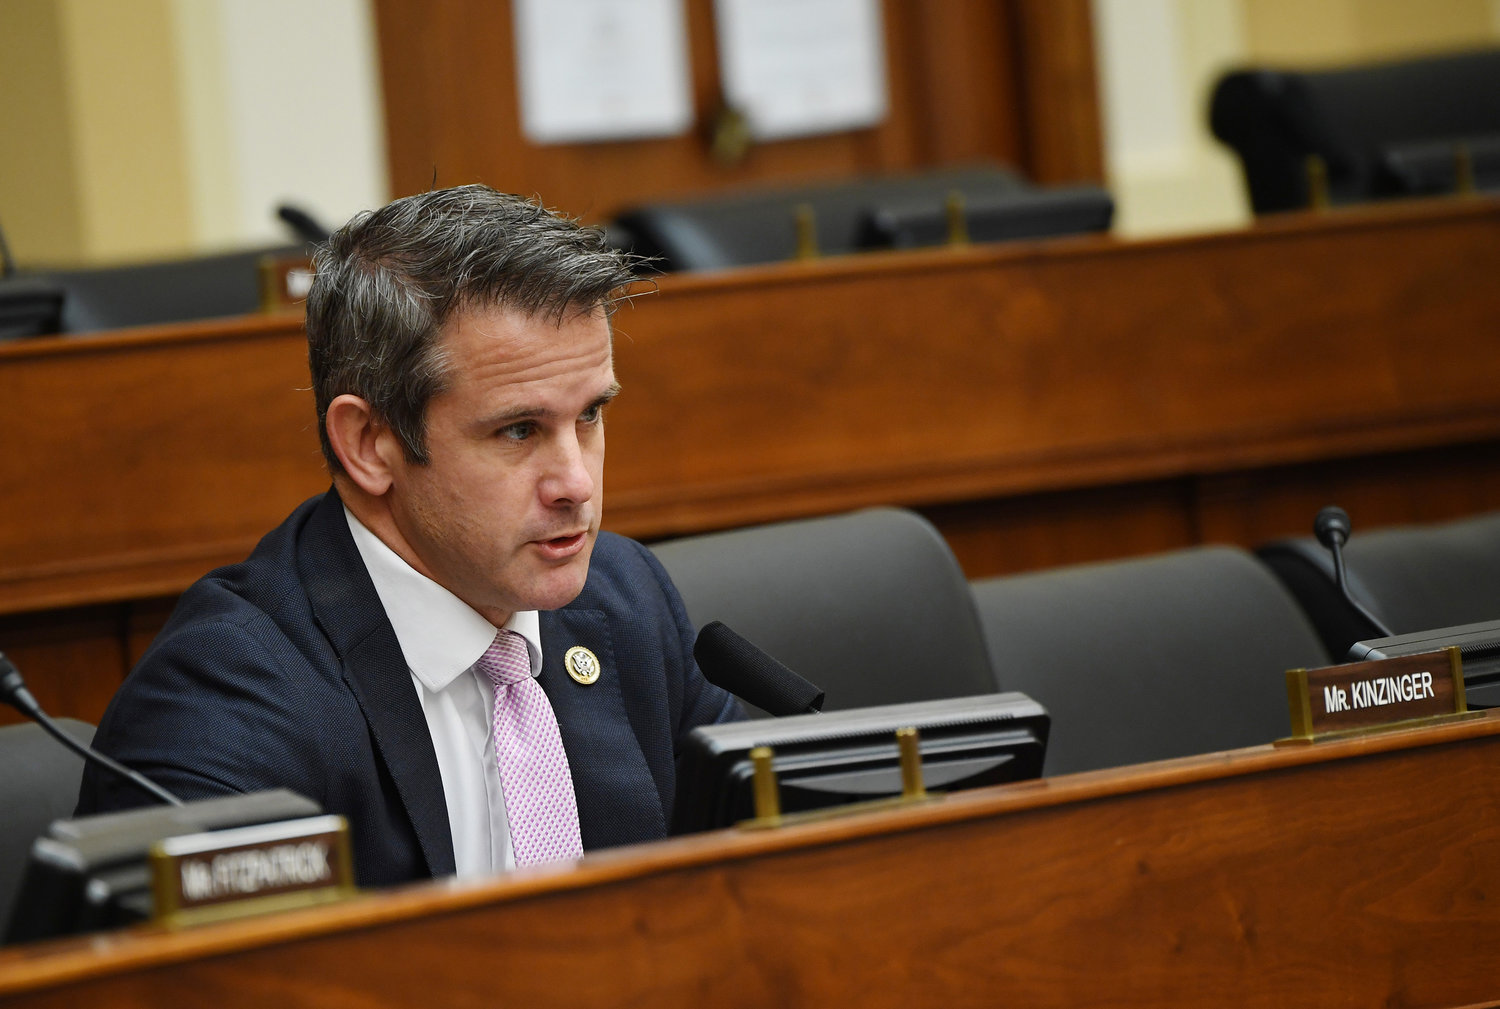 Rep. Adam Kinzinger, R-Ill., on Capitol Hill in Washington, D.C. on Sept. 16, 2020. (Kevin Dietsch/Pool/AFP/Getty Images)